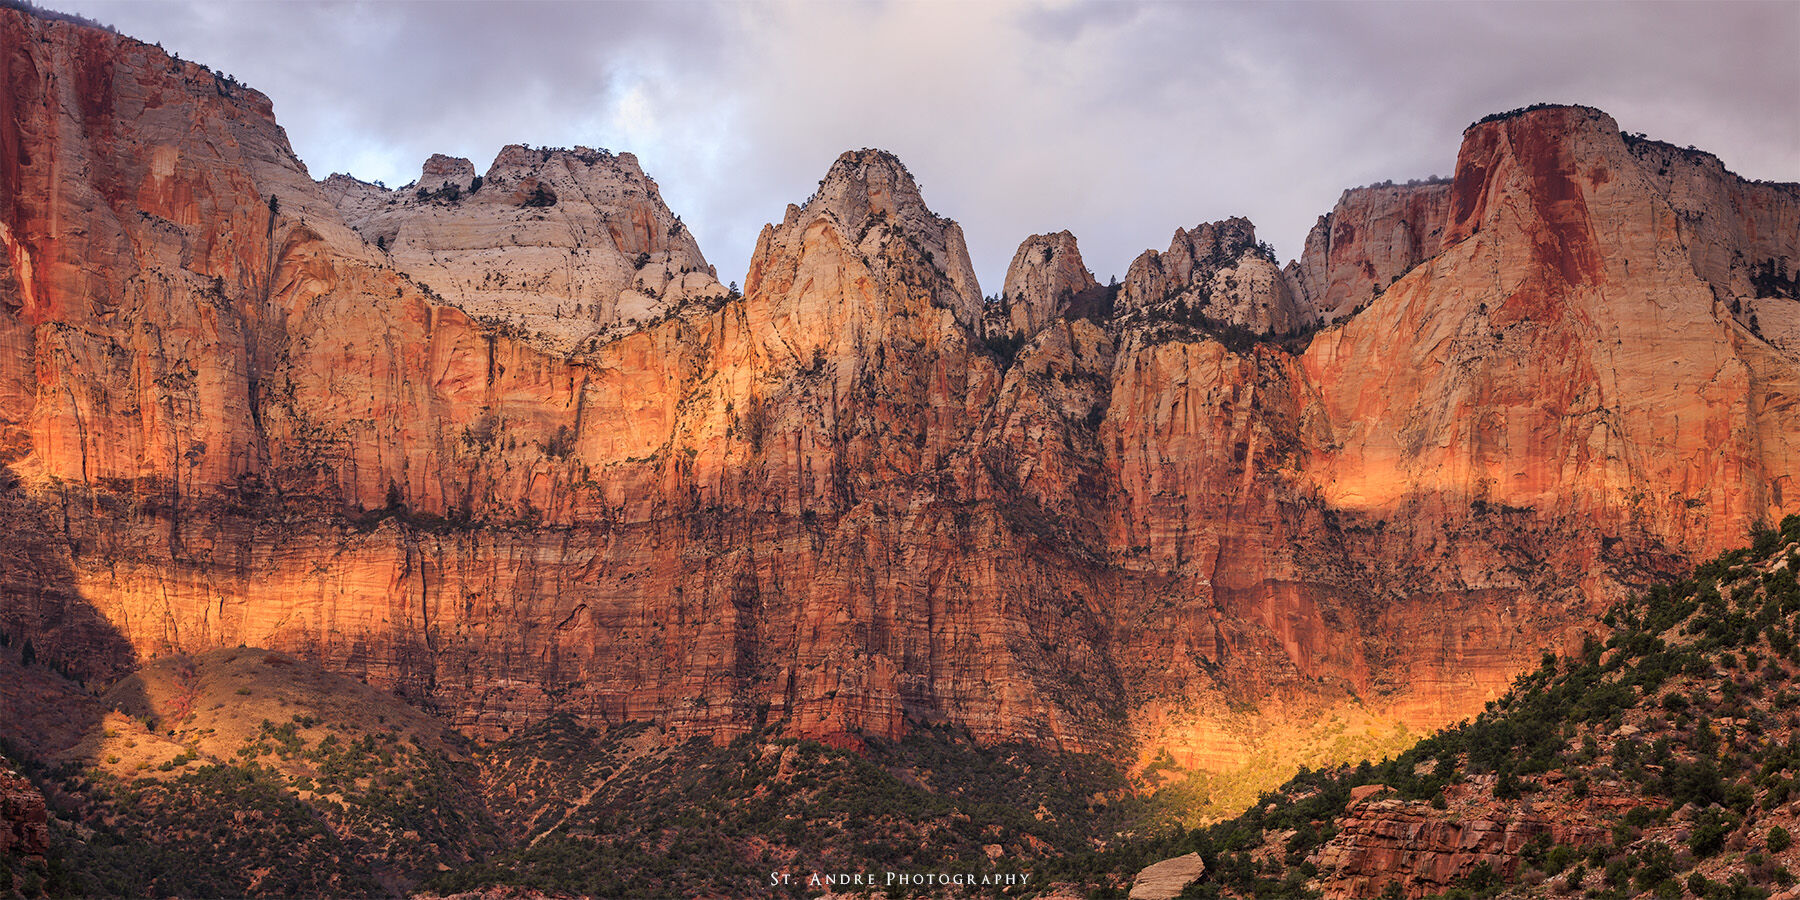 The Towers of the Virgin in Zion National Park with dappled light across the cliff faces. 